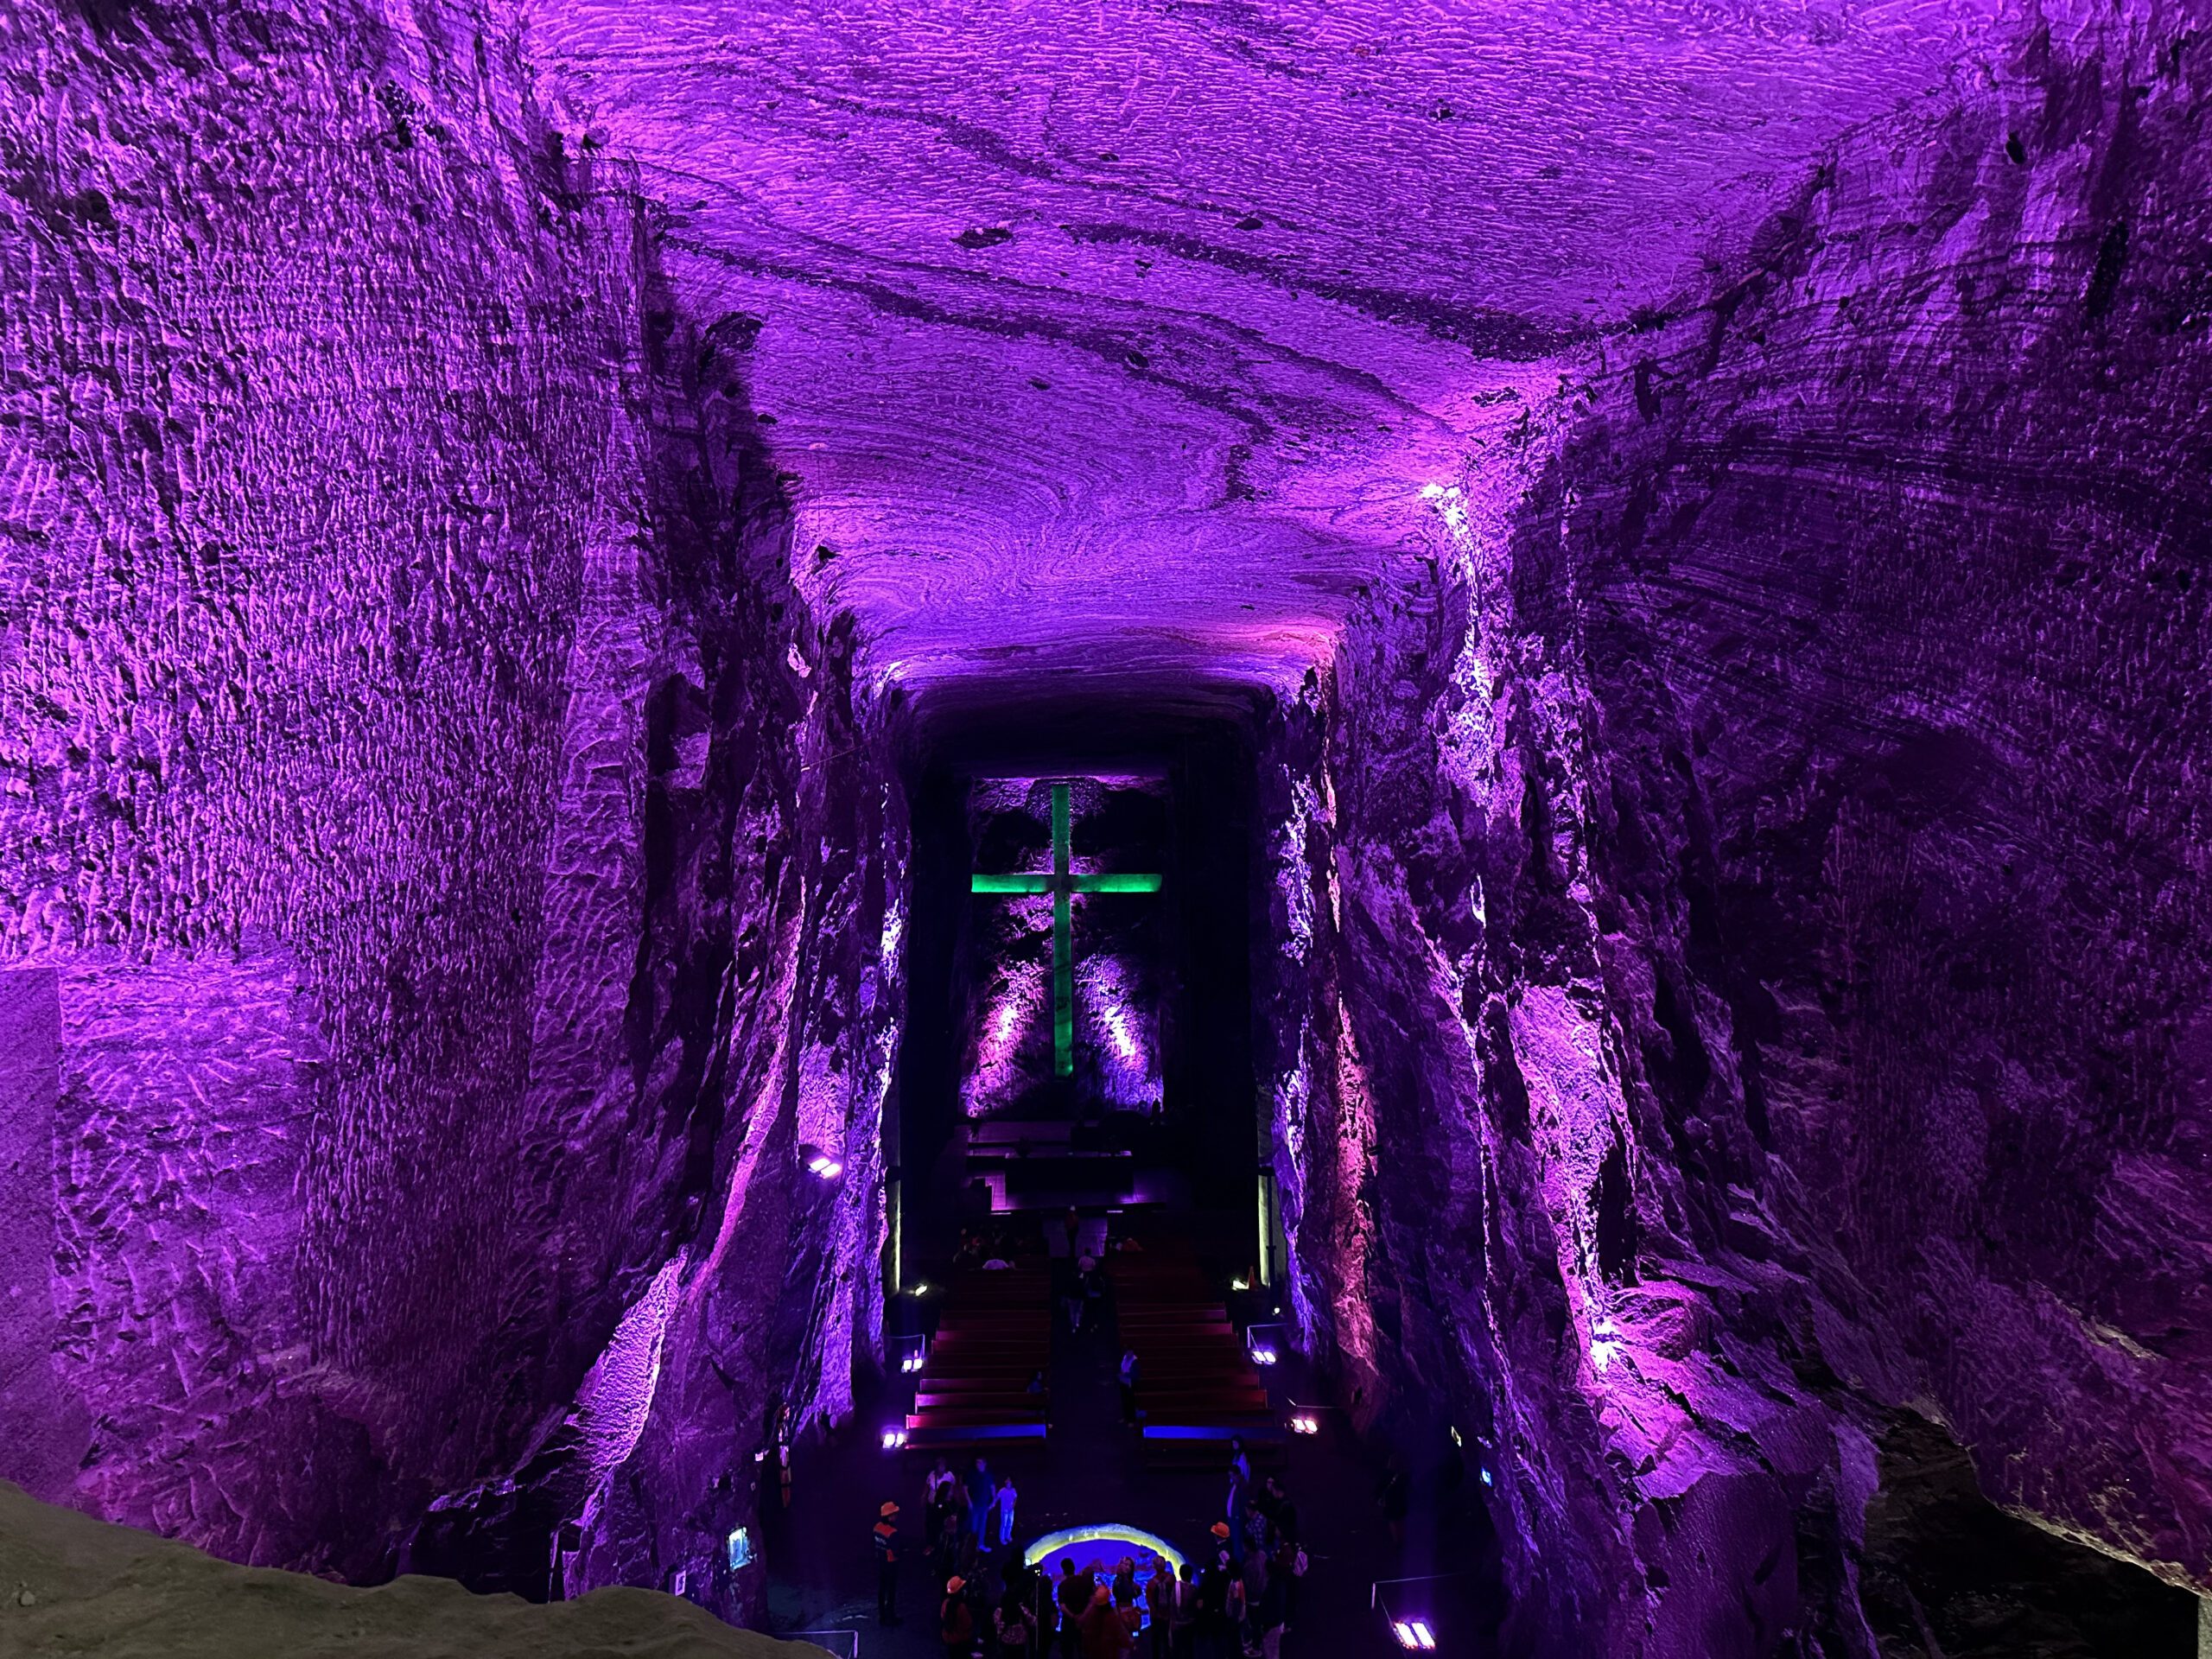 A large underground cavern lit with purple lights features a cross-shaped structure at the far end, with people gathered at the bottom—an unforgettable addition to your Bogotá city tours.